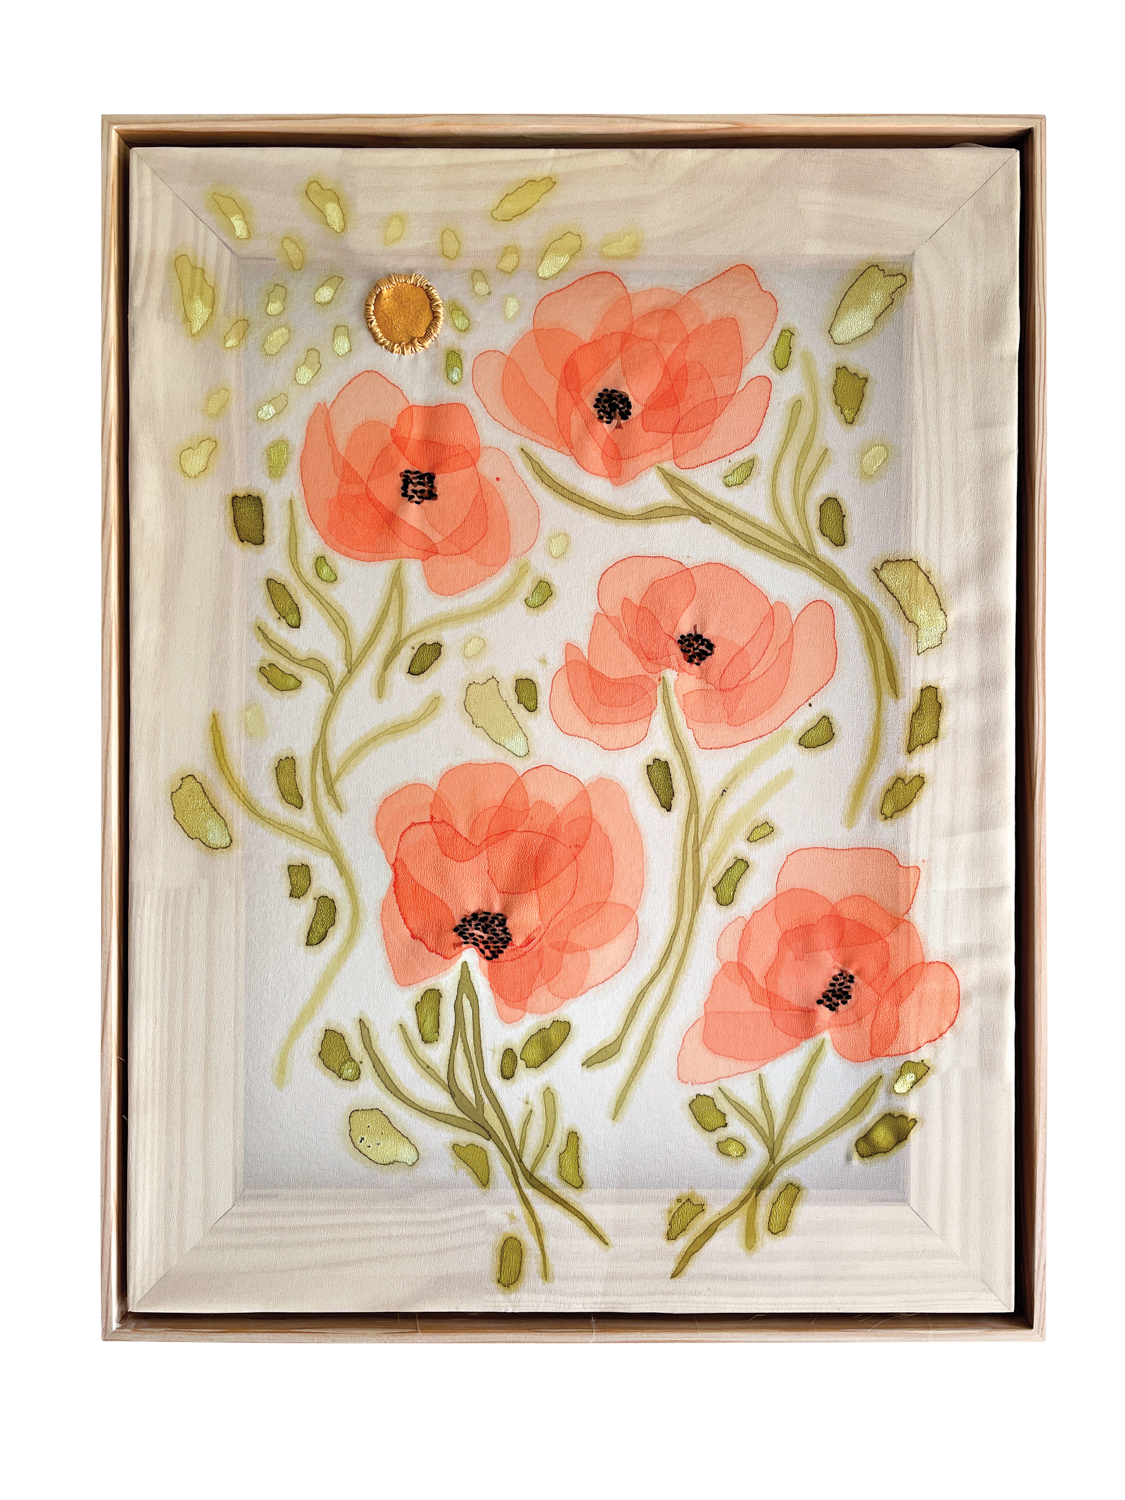 An artwork on silk by Courtney Griffin depicting flowers